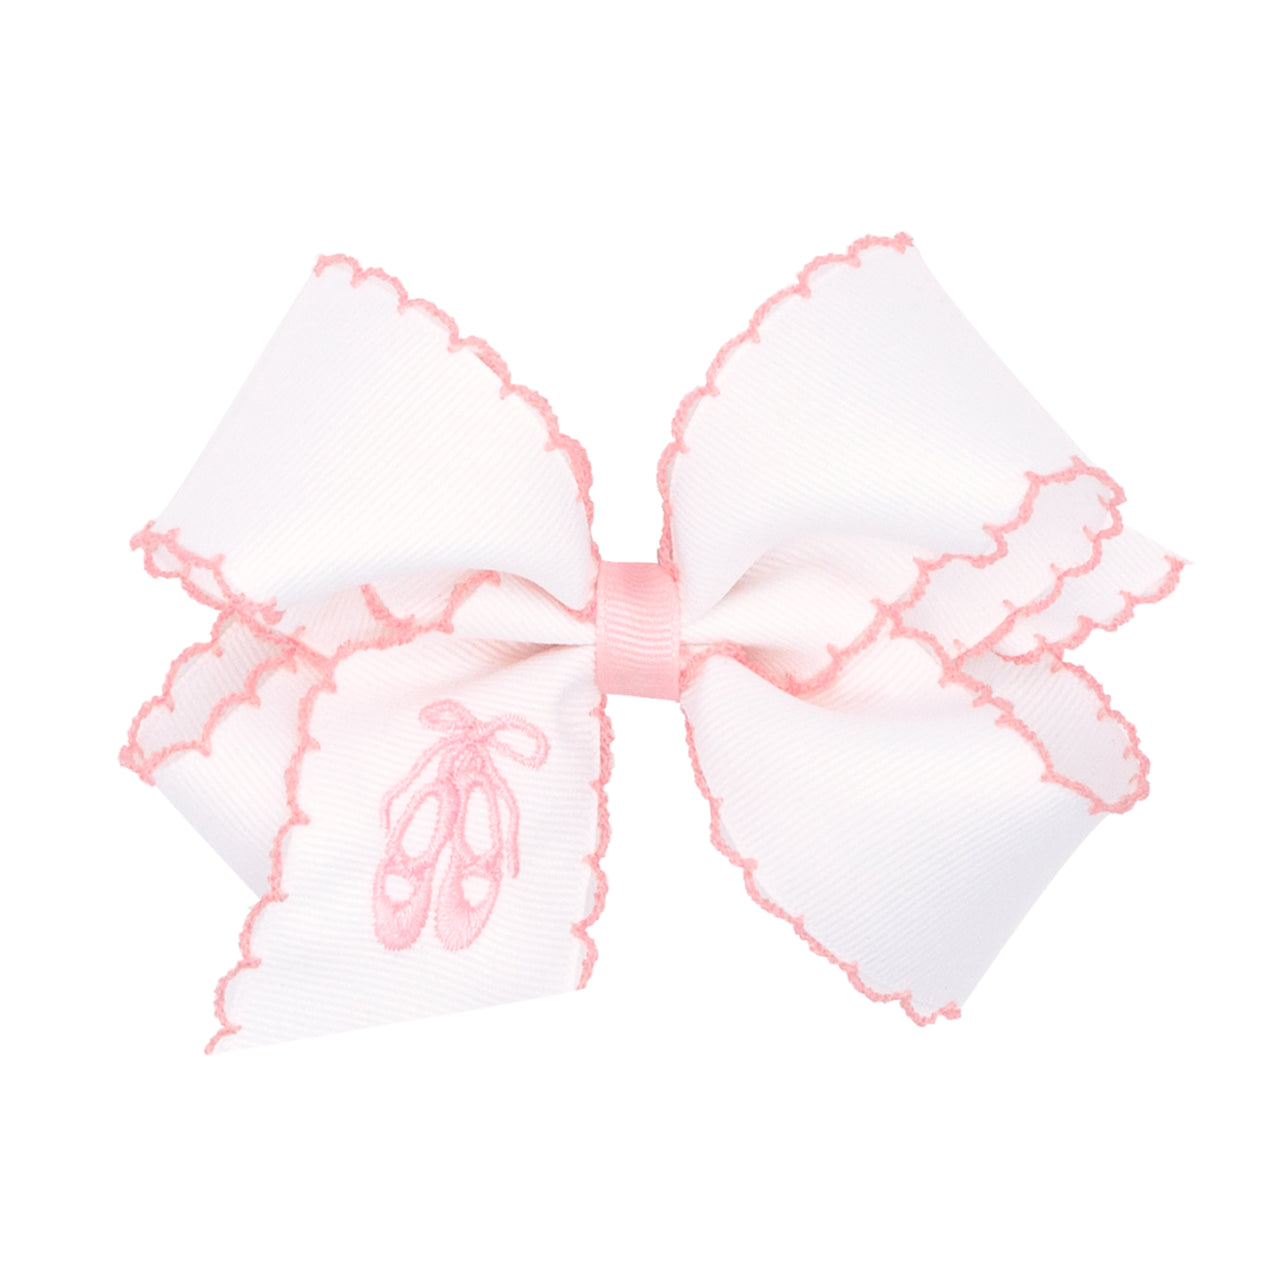 Wee Ones Medium Grosgrain Bow w/ Embroidery & Moonstitch Edge